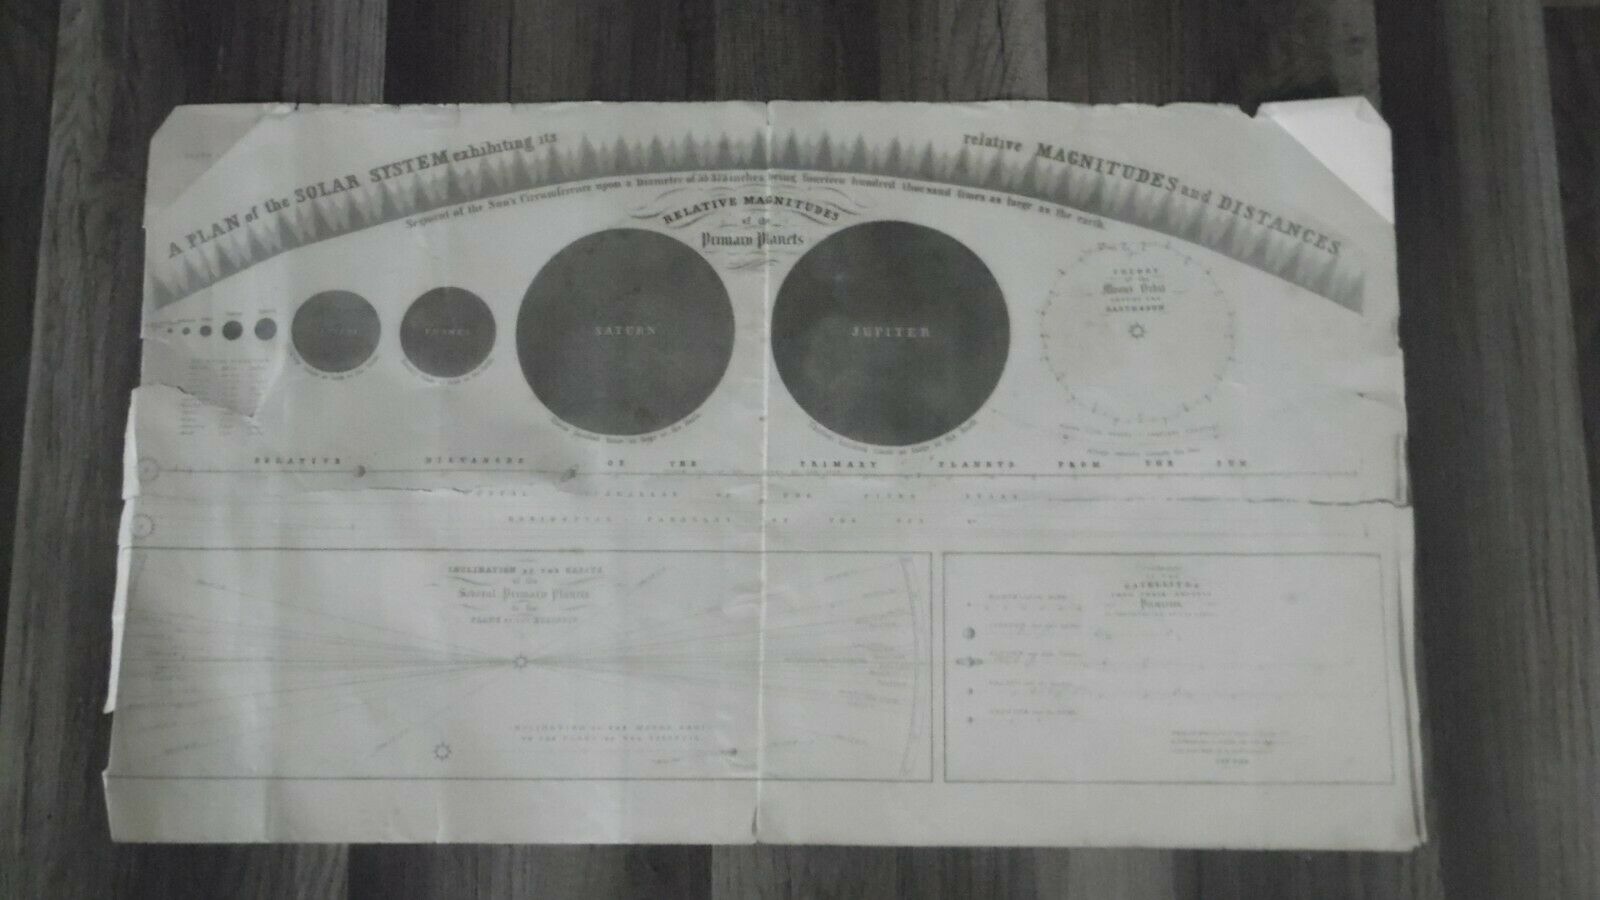 1856 Burritt-huntington Plate 1 Relative Magnitudes Of The Primary Planets Chart